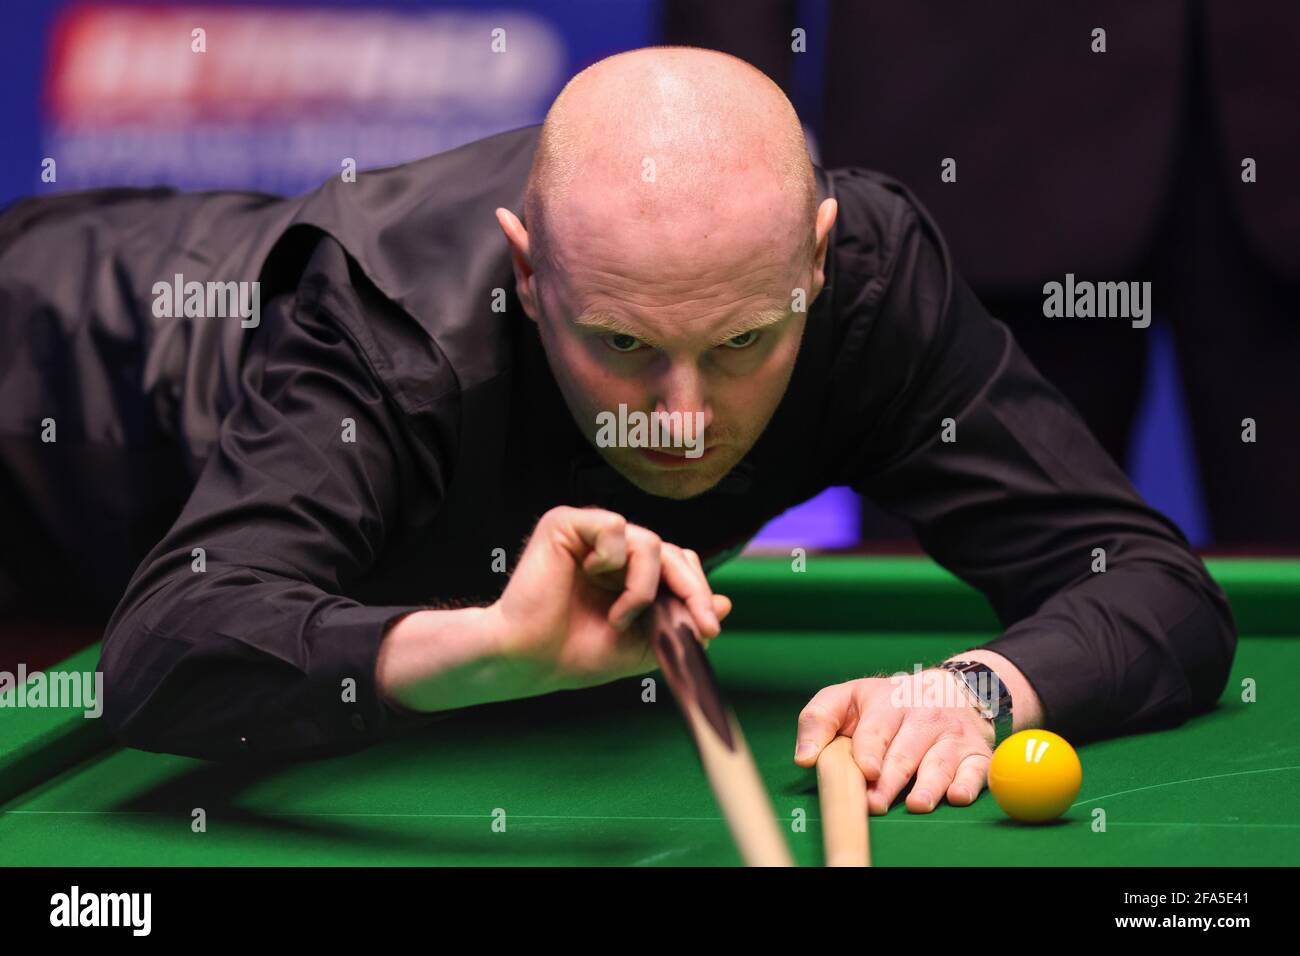 Anthony McGill during his match against Ronnie OSullivan on day seven of the Betfred World Snooker Championships 2021 at The Crucible, Sheffield